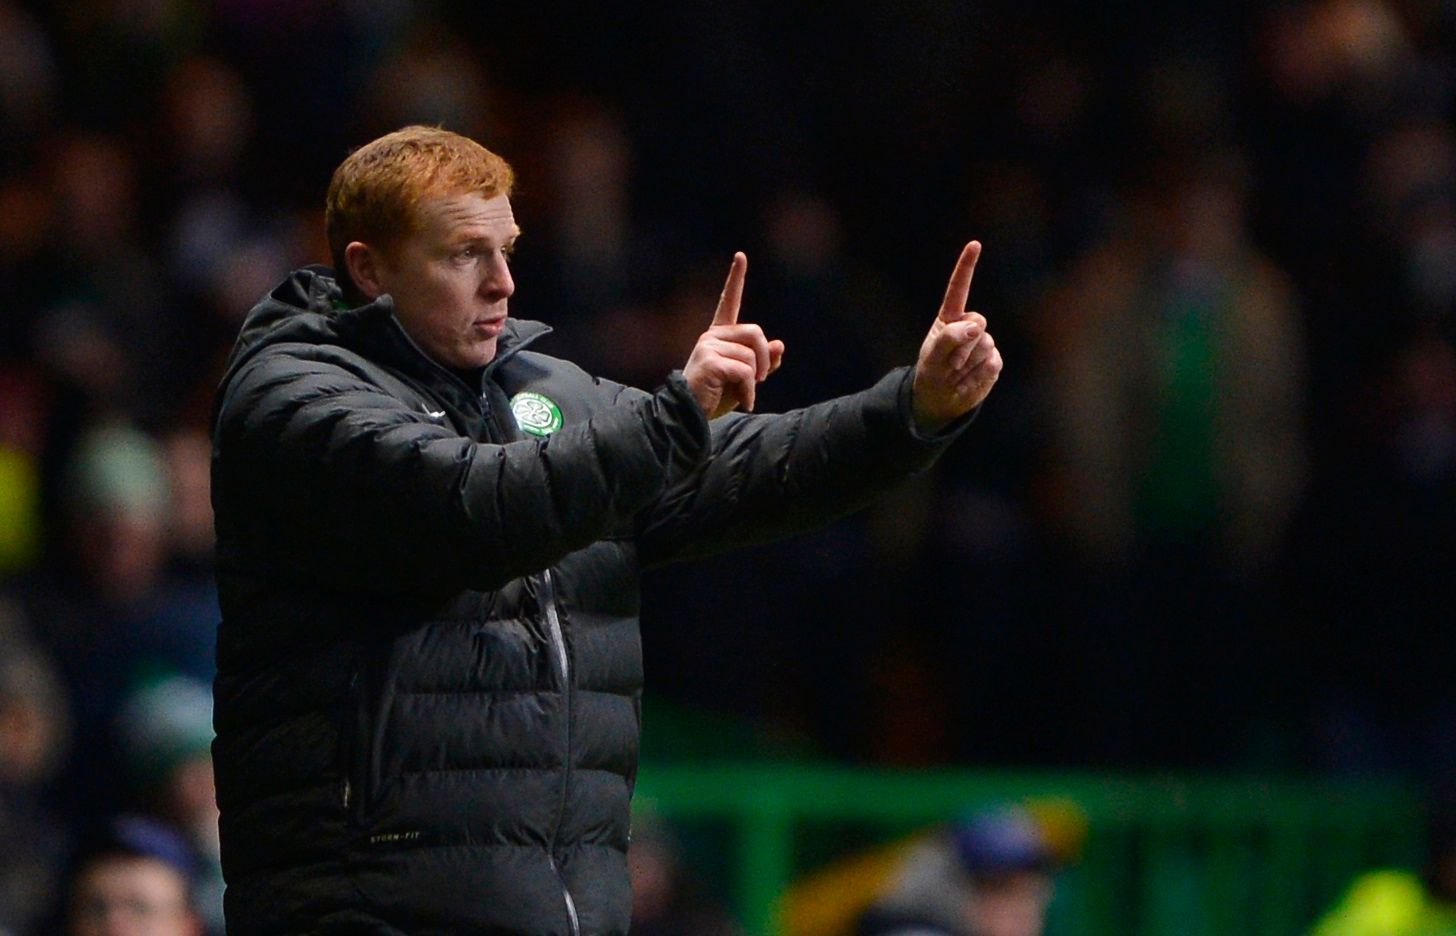 Celtic's manager Neil Lennon reacts to his team's performance during their Champions League Group G soccer match against Spartak Moscow at Celtic Park stadium in Glasgow, Scotland December 5, 2012. REUTERS/Russell Cheyne (BRITAIN - Tags: SPORT SOCCER)